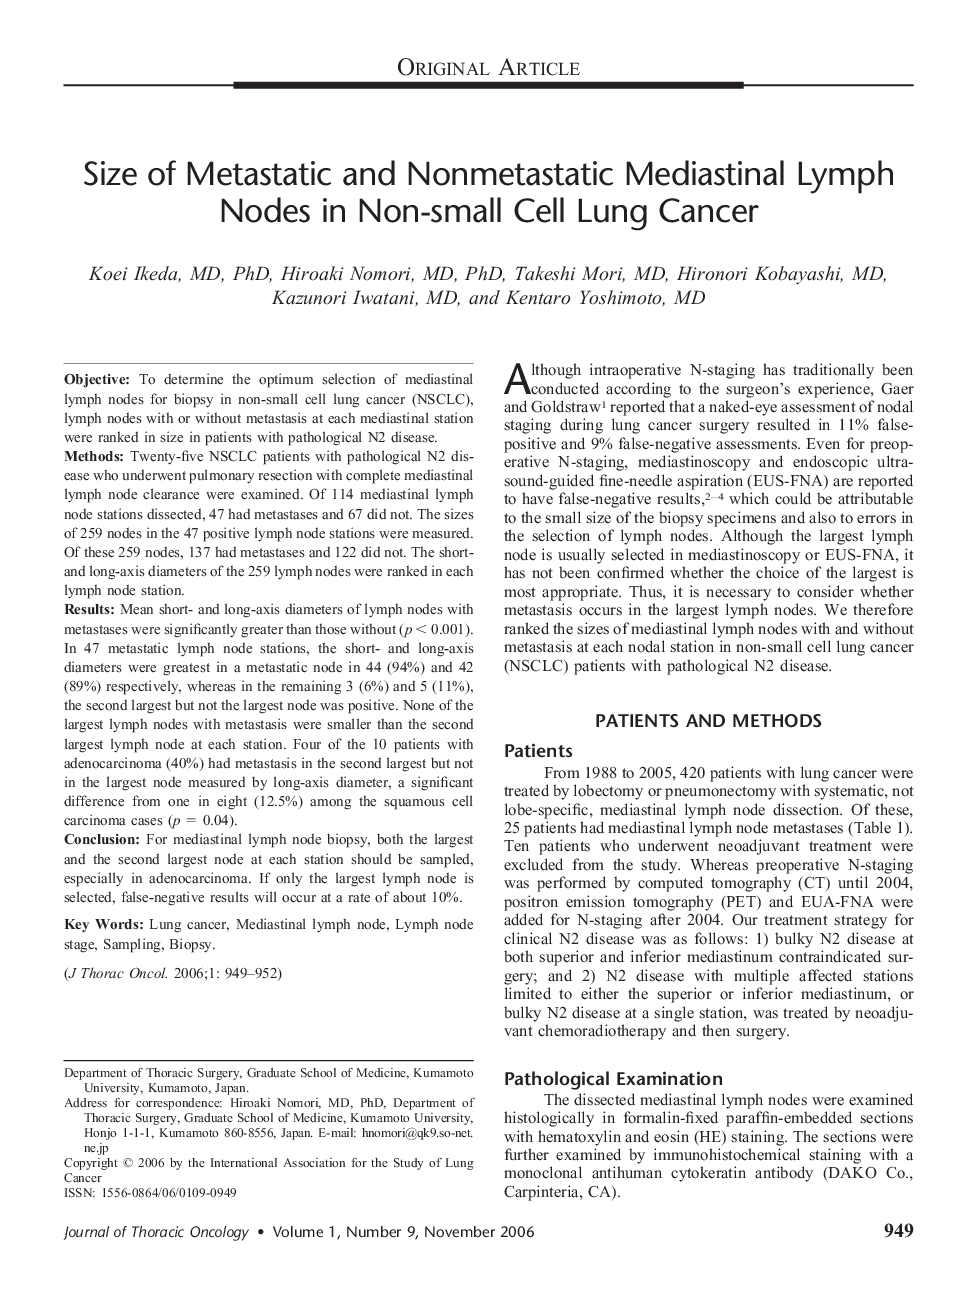 Size of Metastatic and Nonmetastatic Mediastinal Lymph Nodes in Non-small Cell Lung Cancer